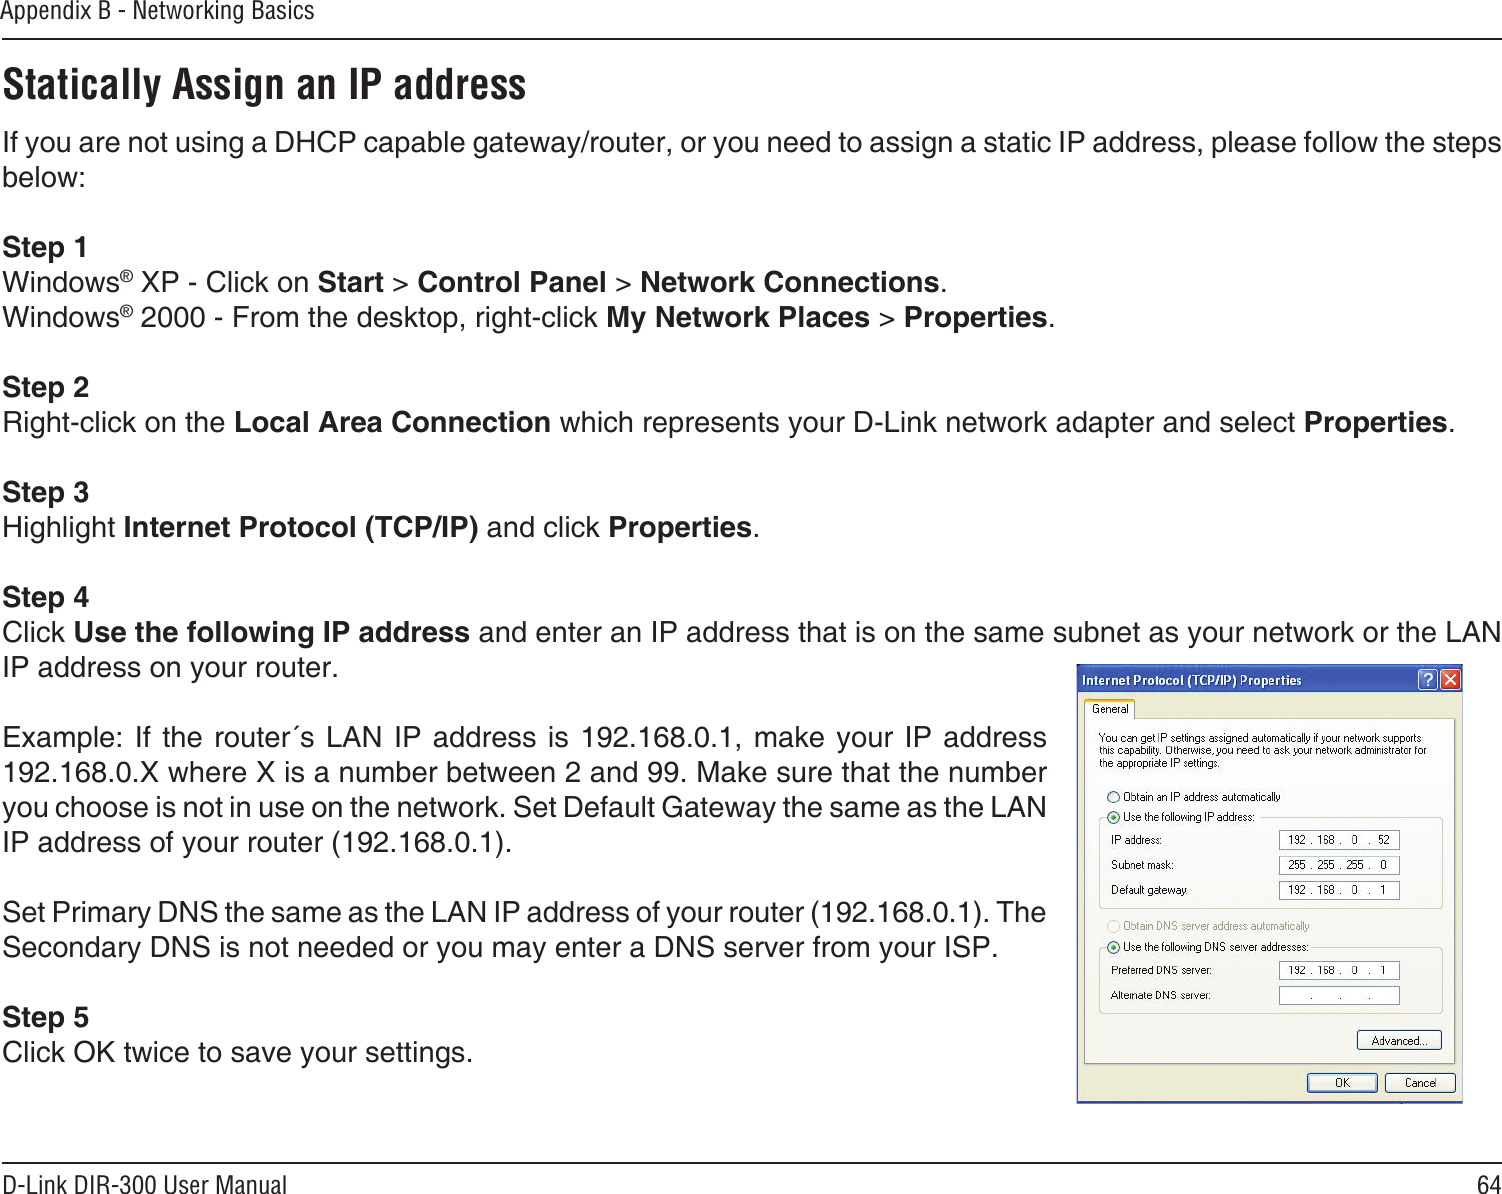 64D-Link DIR-300 User ManualAppendix B - Networking BasicsStatically Assign an IP addressIf you are not using a DHCP capable gateway/router, or you need to assign a static IP address, please follow the steps below:Step 1Windows® XP - Click on Start &gt; Control Panel &gt; Network Connections.Windows® 2000 - From the desktop, right-click My Network Places &gt; Properties.Step 2Right-click on the Local Area Connection which represents your D-Link network adapter and select Properties.Step 3Highlight Internet Protocol (TCP/IP) and click Properties.Step 4Click Use the following IP address and enter an IP address that is on the same subnet as your network or the LAN IP address on your router. Example: If  the router´s  LAN IP  address is 192.168.0.1, make your  IP address 192.168.0.X where X is a number between 2 and 99. Make sure that the number you choose is not in use on the network. Set Default Gateway the same as the LAN IP address of your router (192.168.0.1). Set Primary DNS the same as the LAN IP address of your router (192.168.0.1). The Secondary DNS is not needed or you may enter a DNS server from your ISP.Step 5Click OK twice to save your settings.